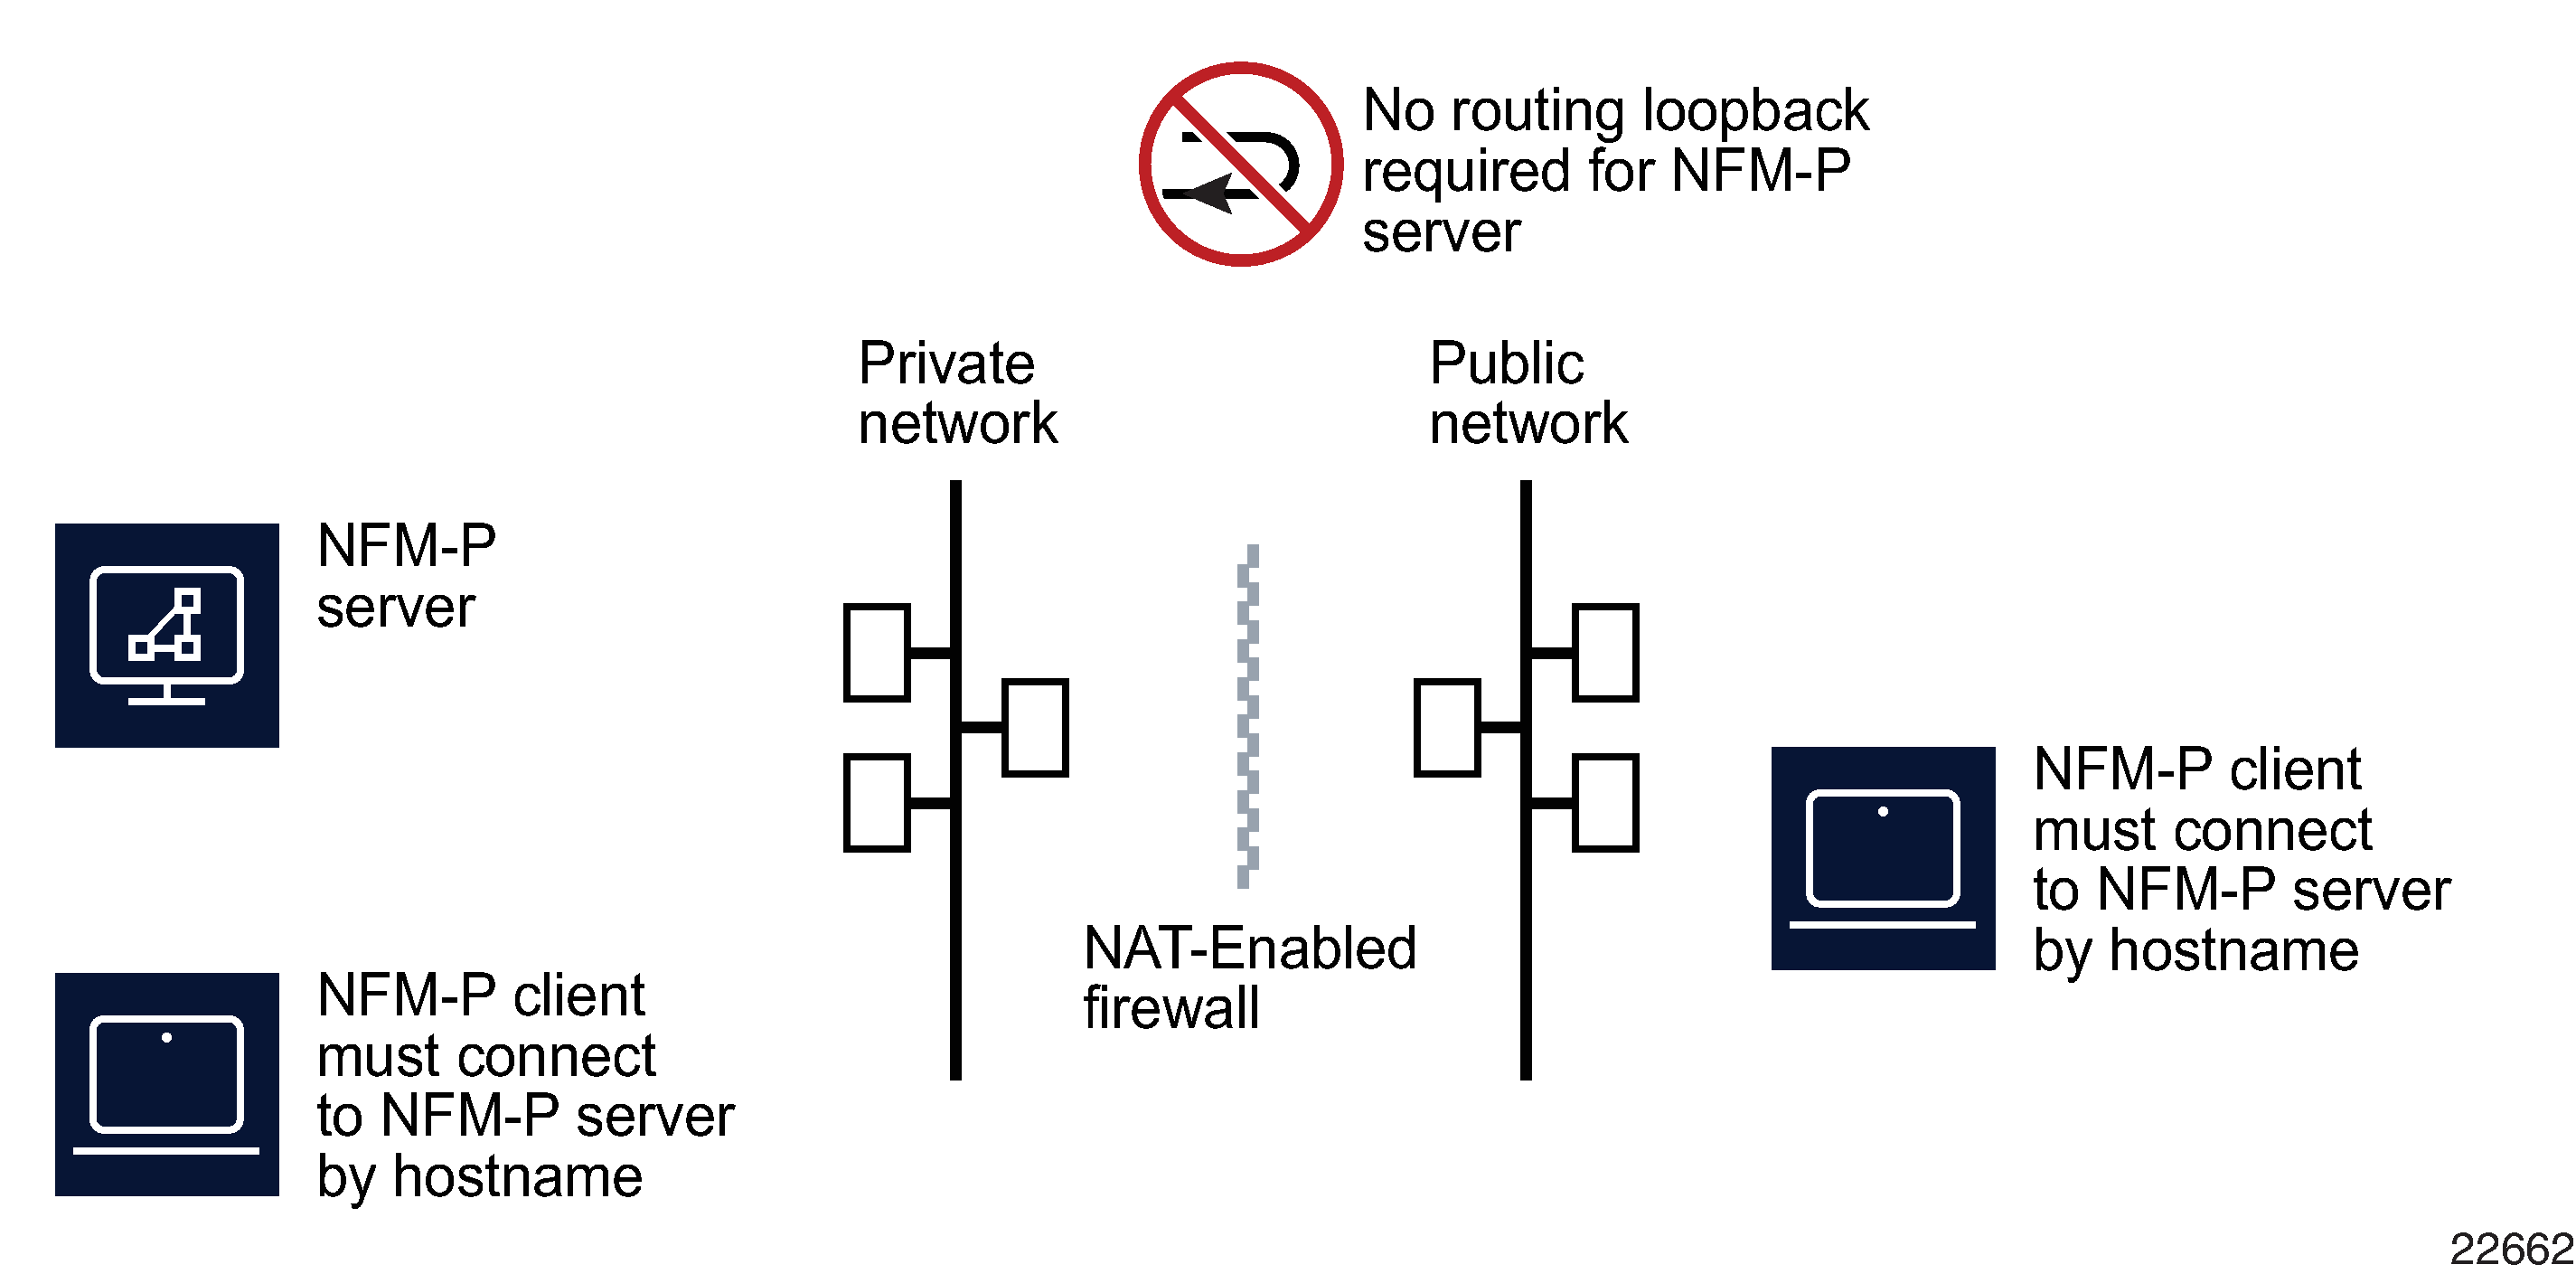 NFM-P server deployment using NAT with name resolution based communication